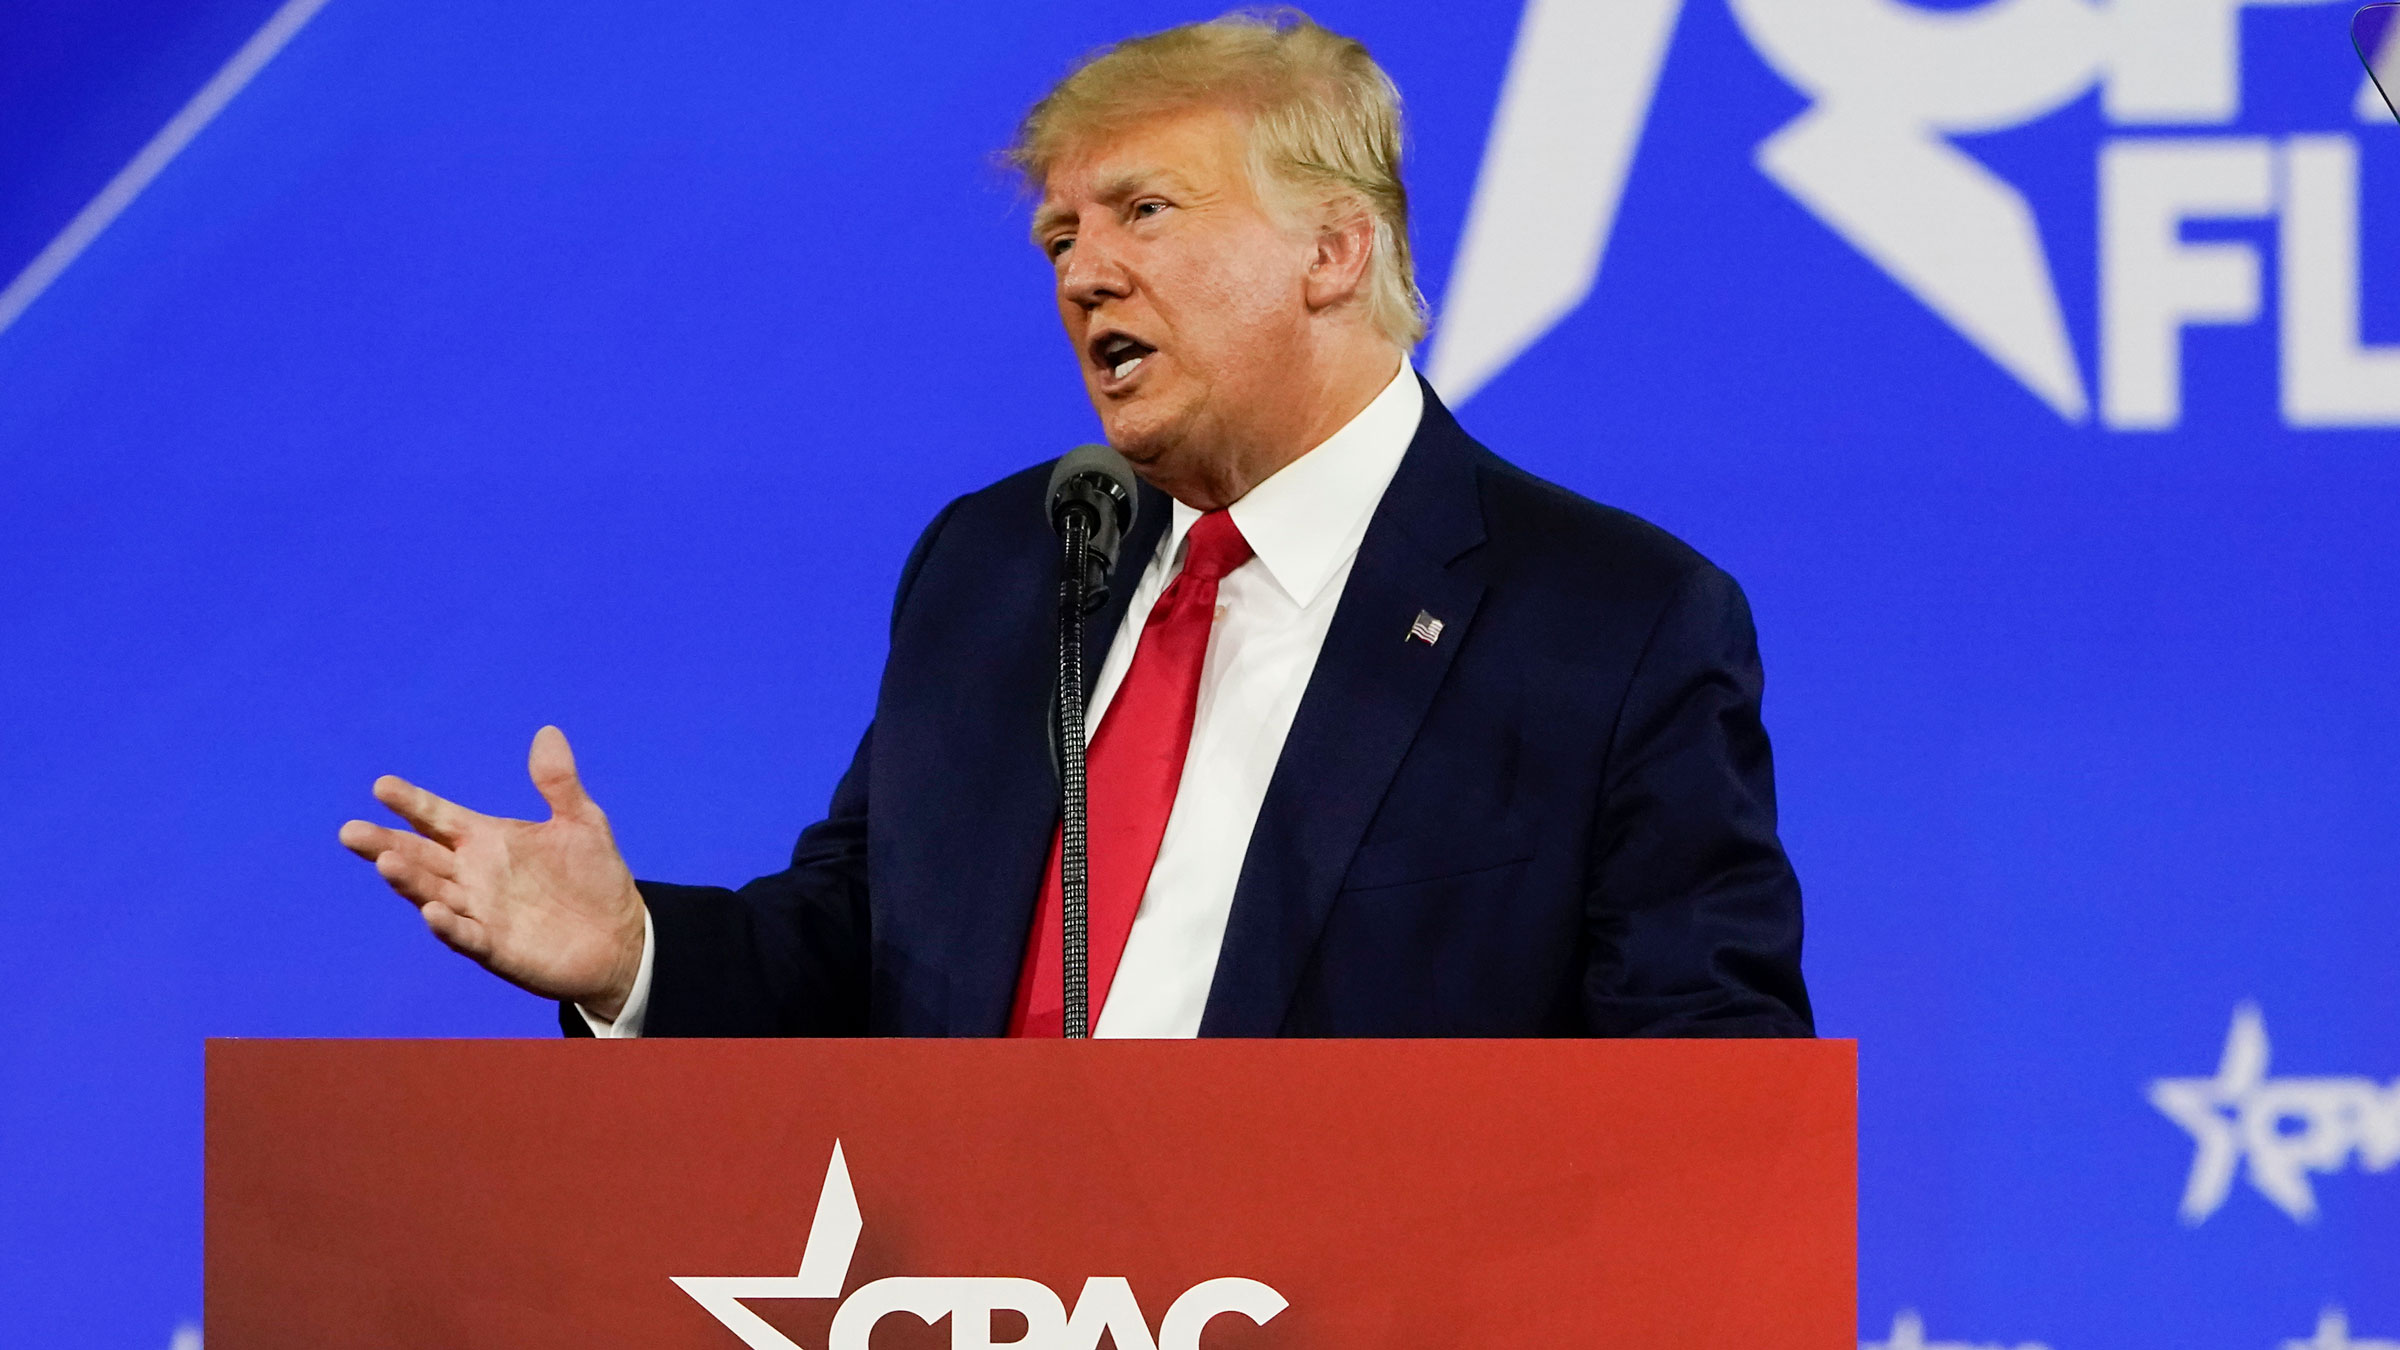 Former US President Donald Trump speaks at the Conservative Political Action Conference on Saturday.